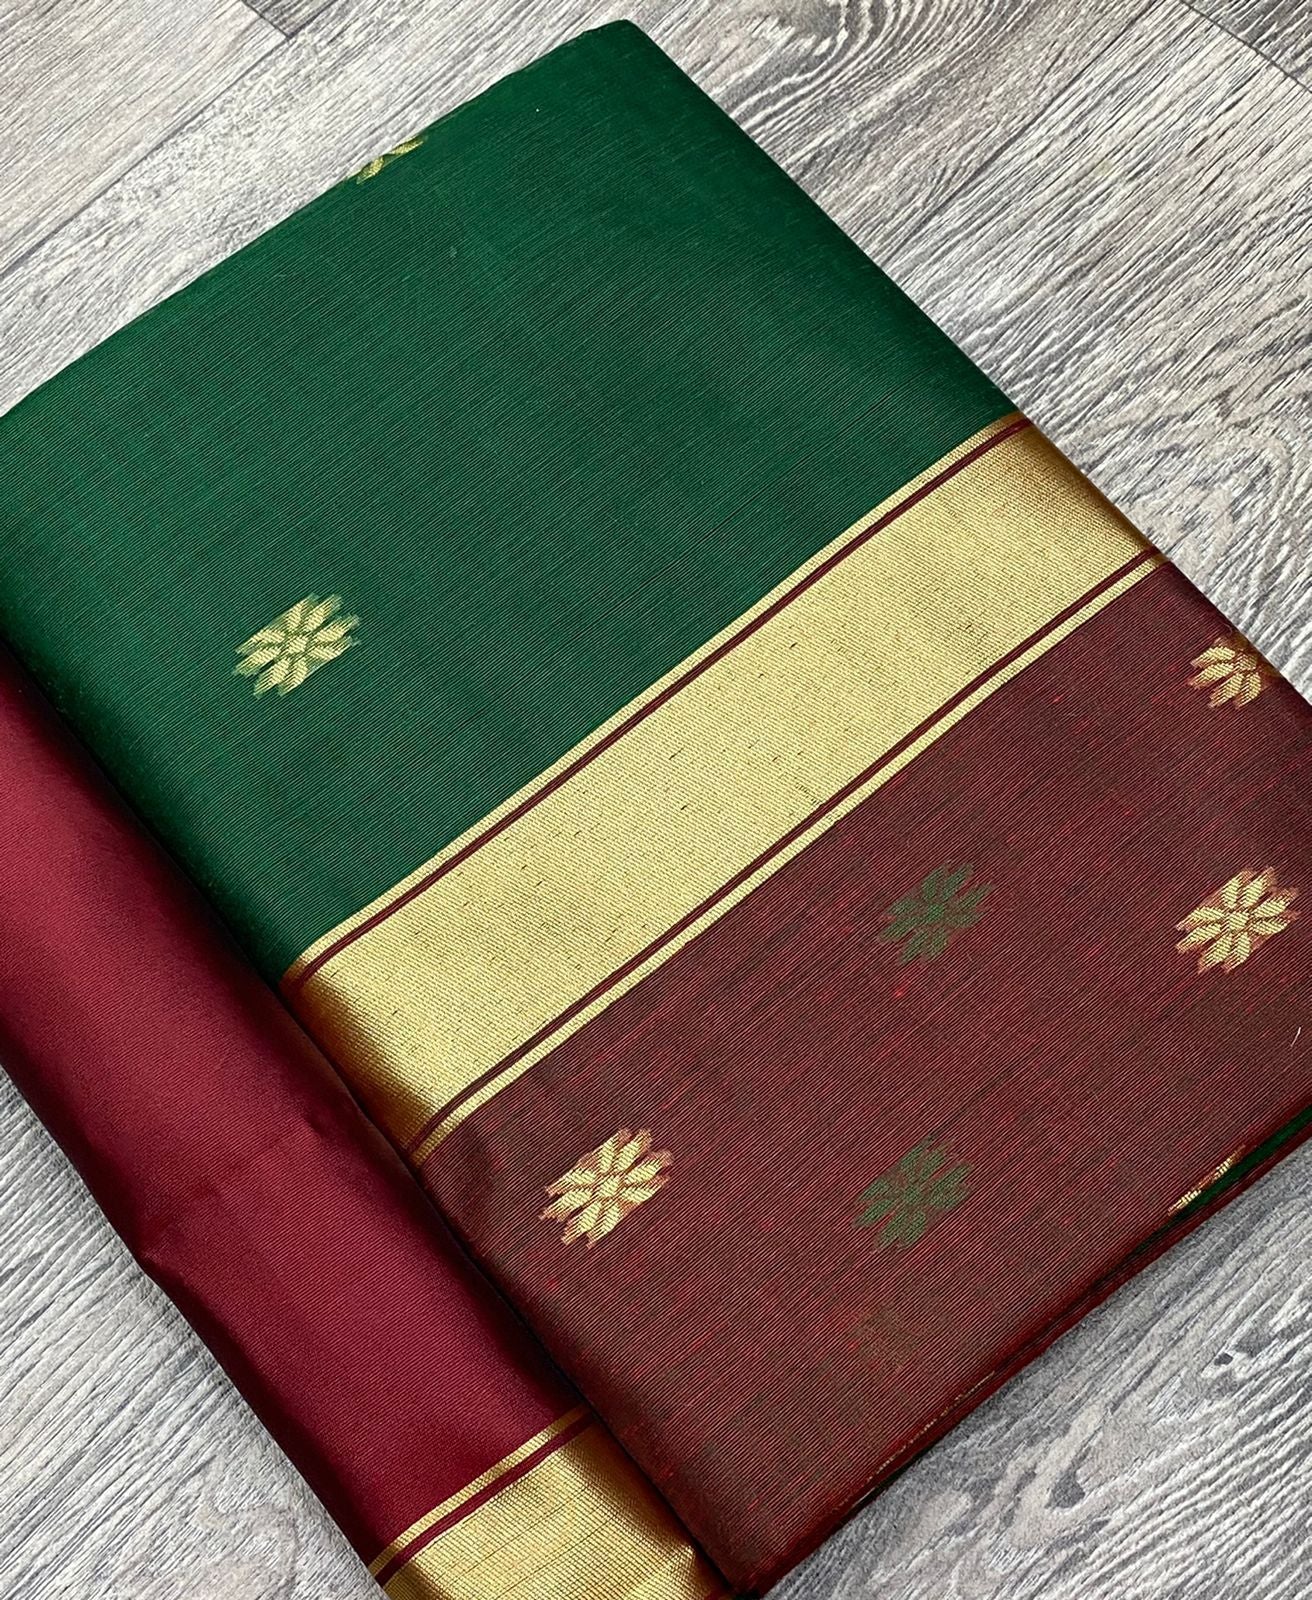 Party Wear Special Lilan Soft Cotton Saree Anant Tex Exports Private Limited